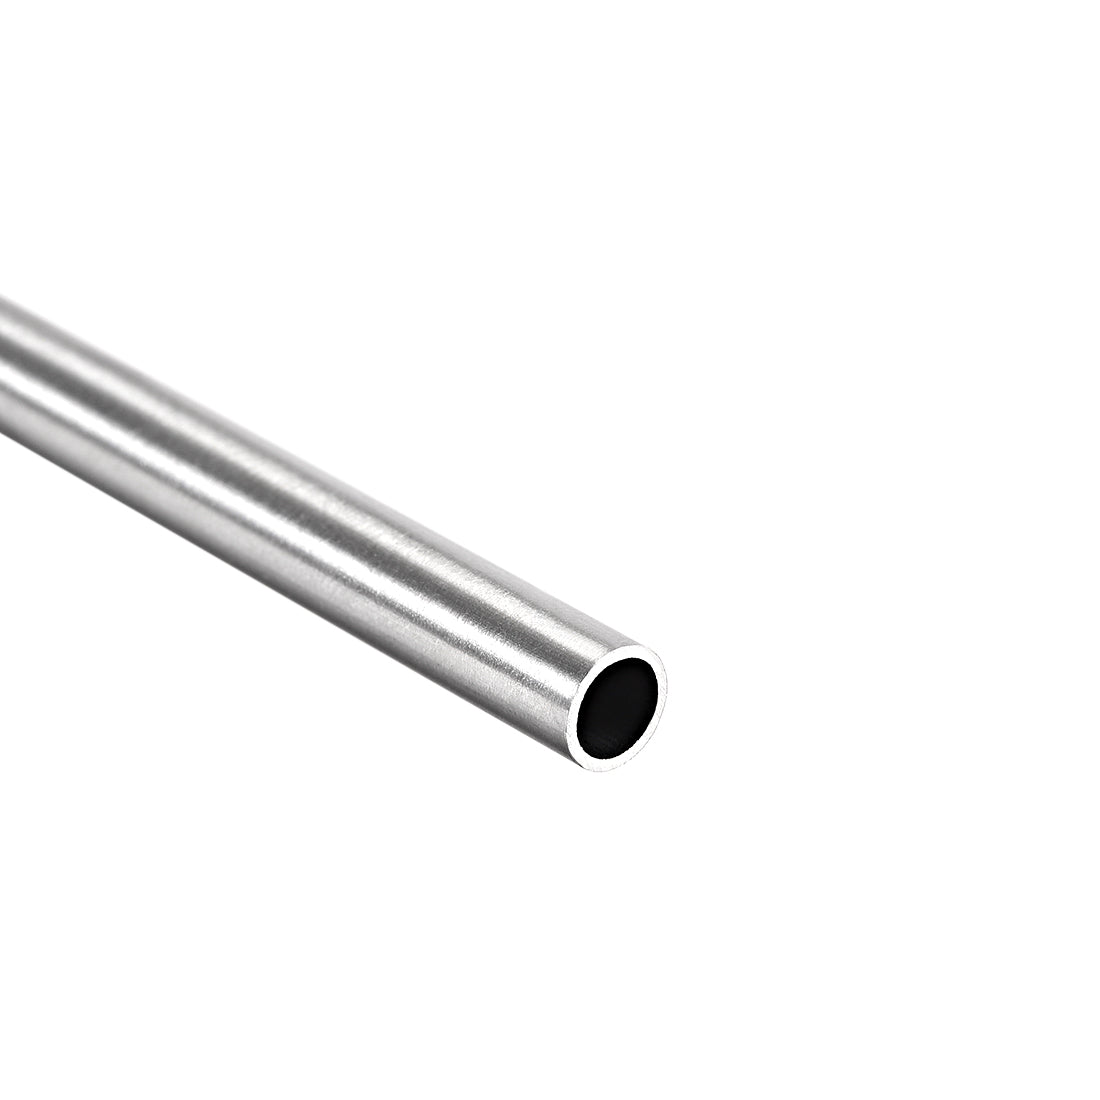 Uxcell Uxcell 304 Stainless Steel Round Tubing 6mm OD 0.6mm Wall Thickness 250mm Length Seamless Straight Pipe Tube 4 Pcs